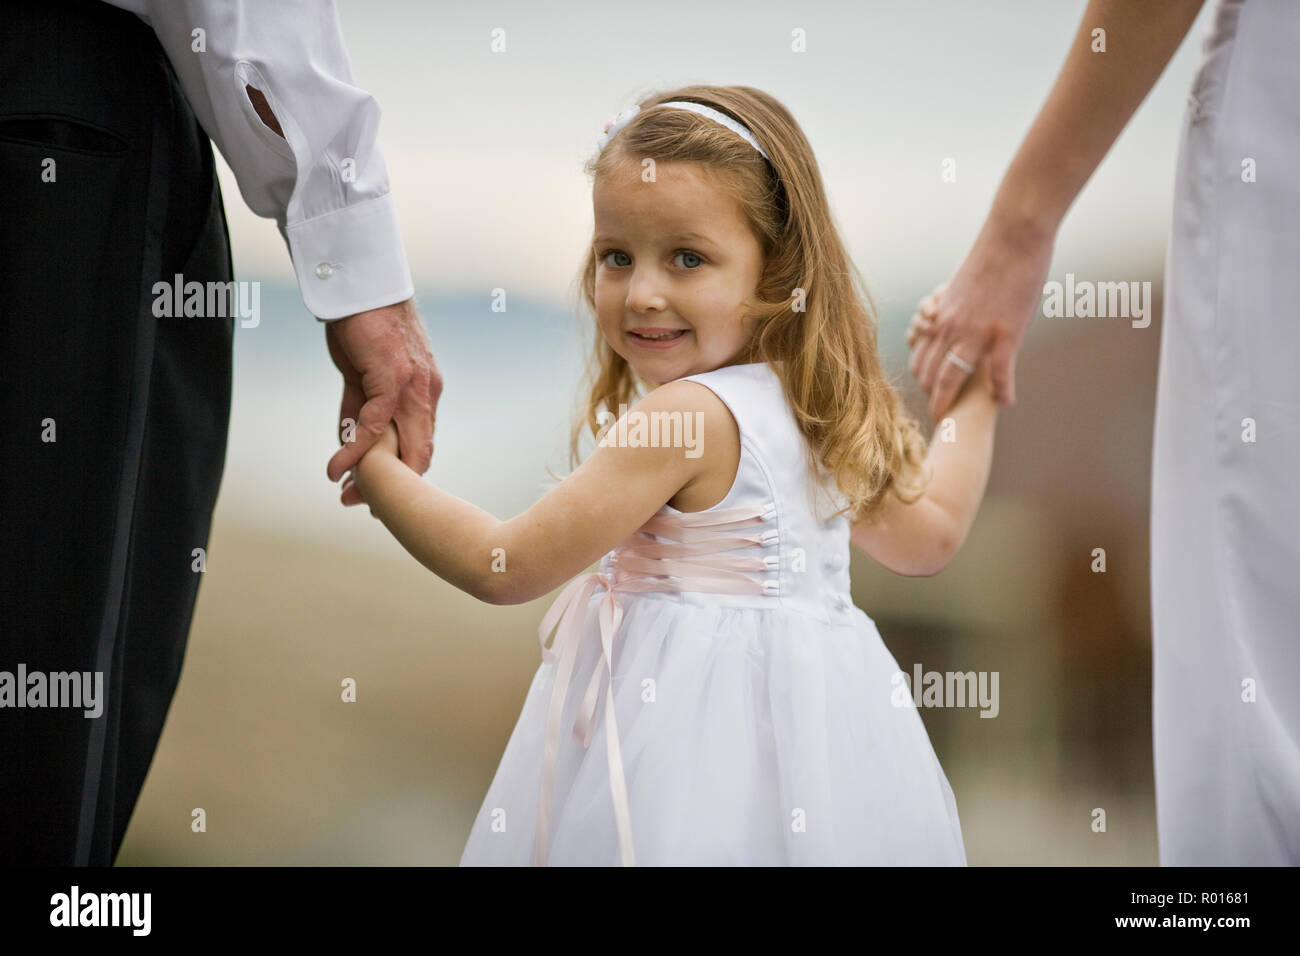 portrait of a young girl holding hands with a bride and groom while dressed as a flower girl. Stock Photo